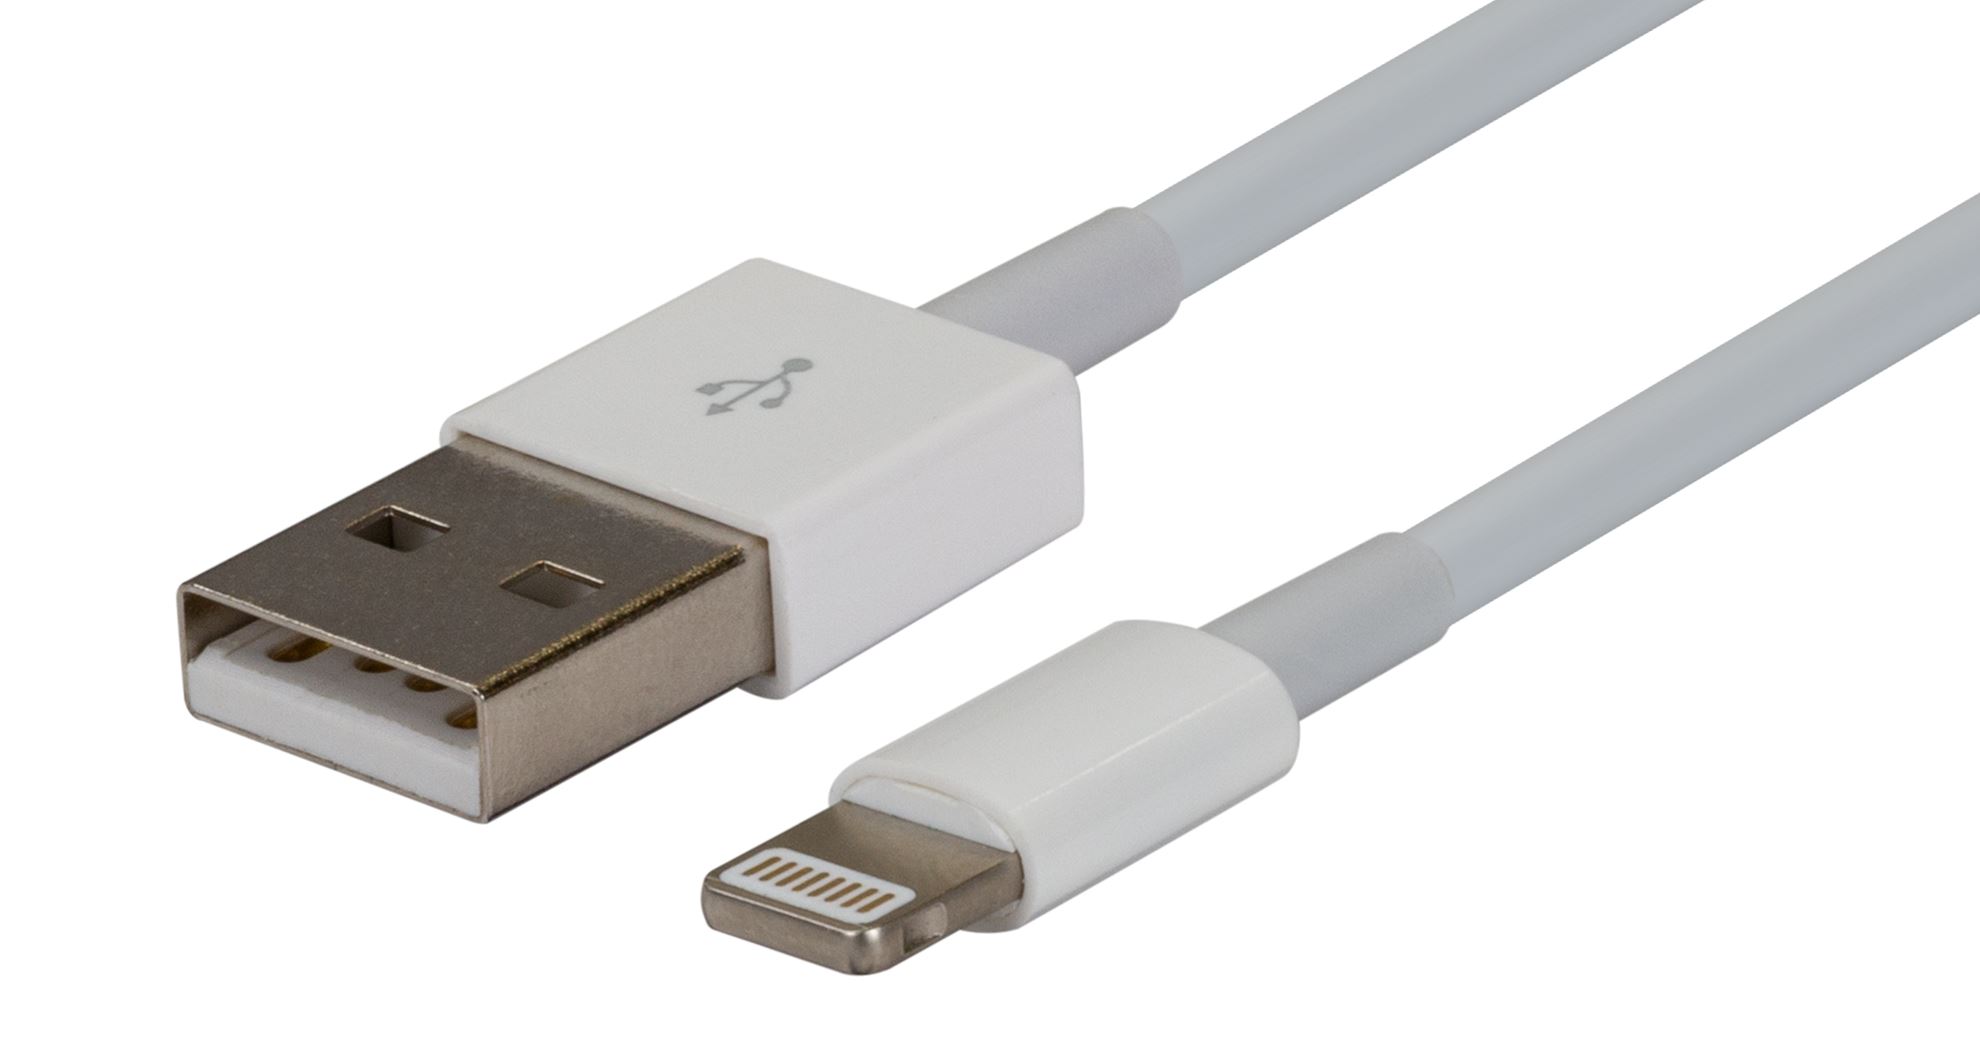 1m iPhone 5 Data Cable USB 2.0 to Lightning